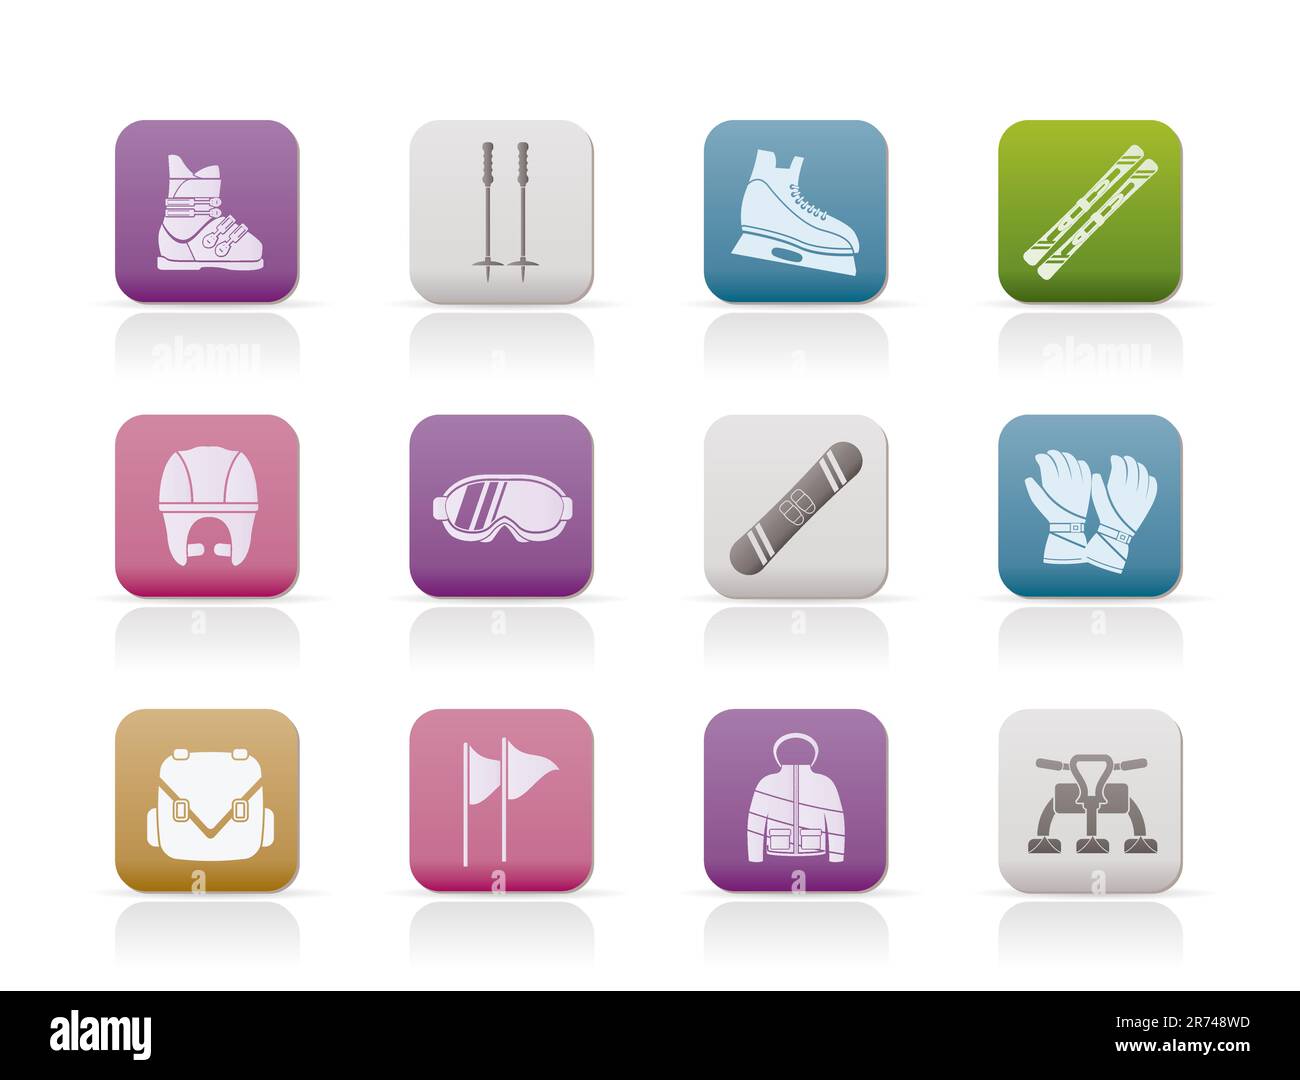 ski and snowboard equipment icons - vector icon set Stock Vector